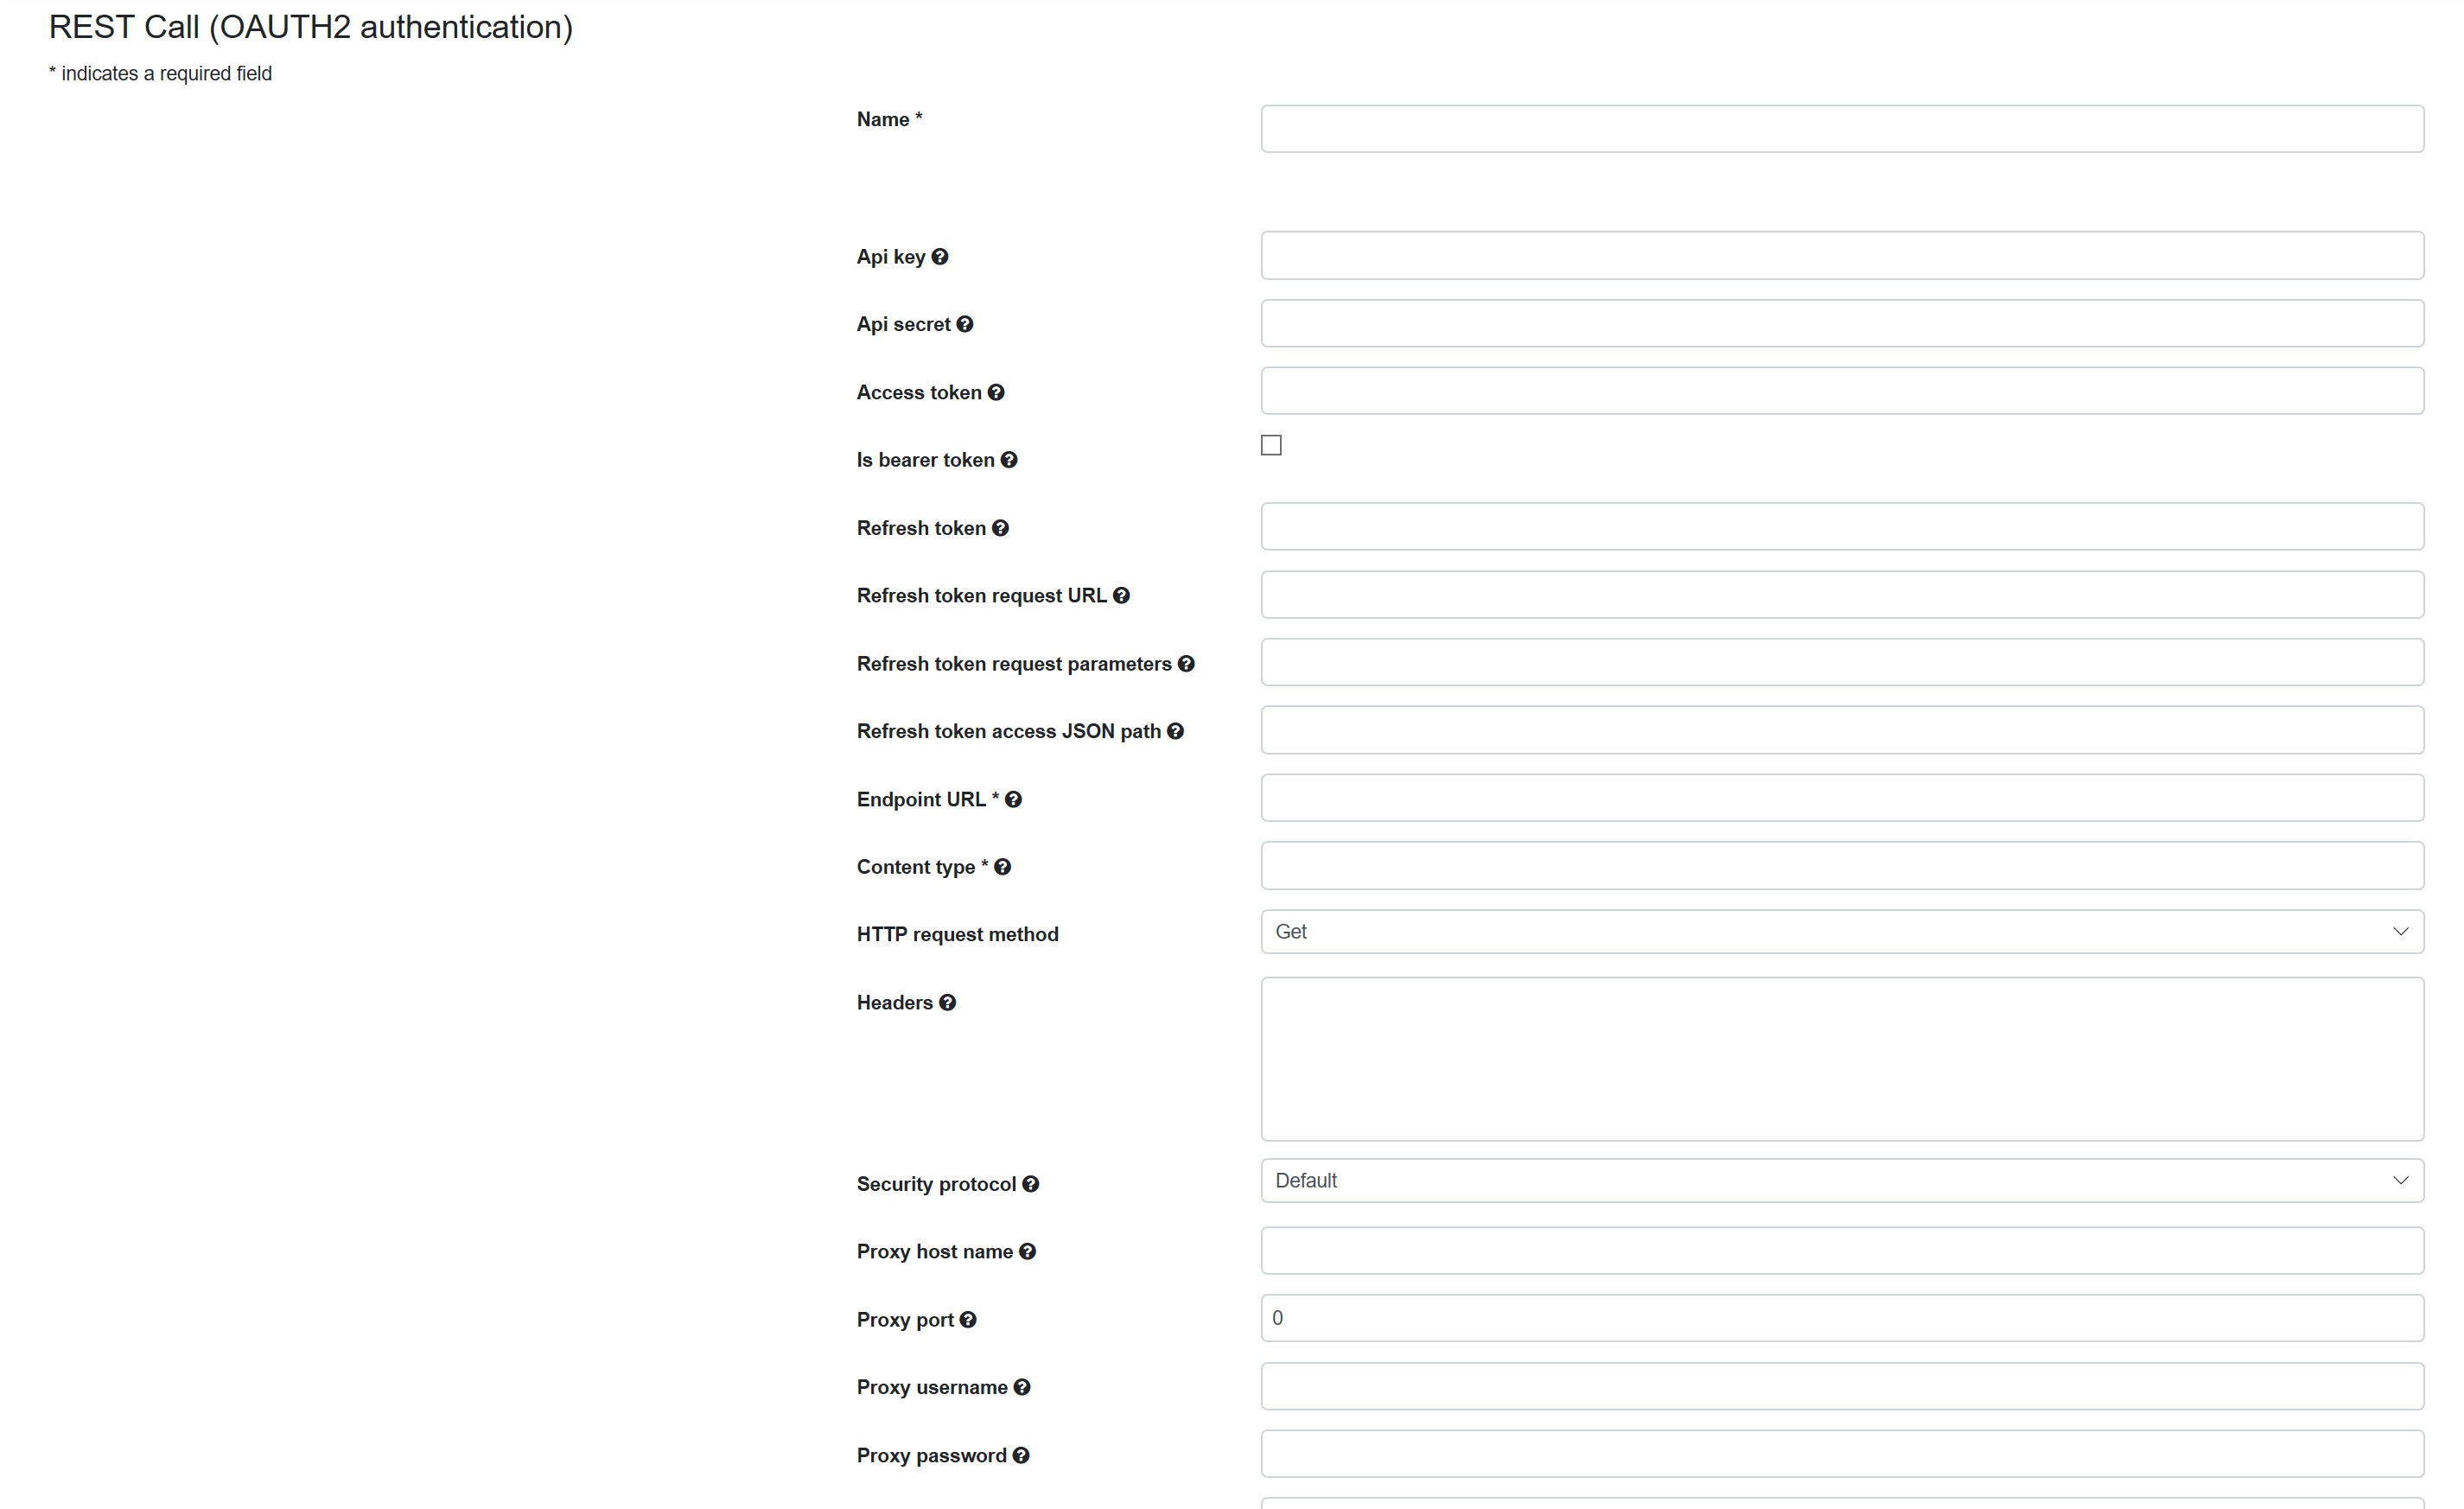 SentryOne Test Create REST (OAuth2 authentication) Target form